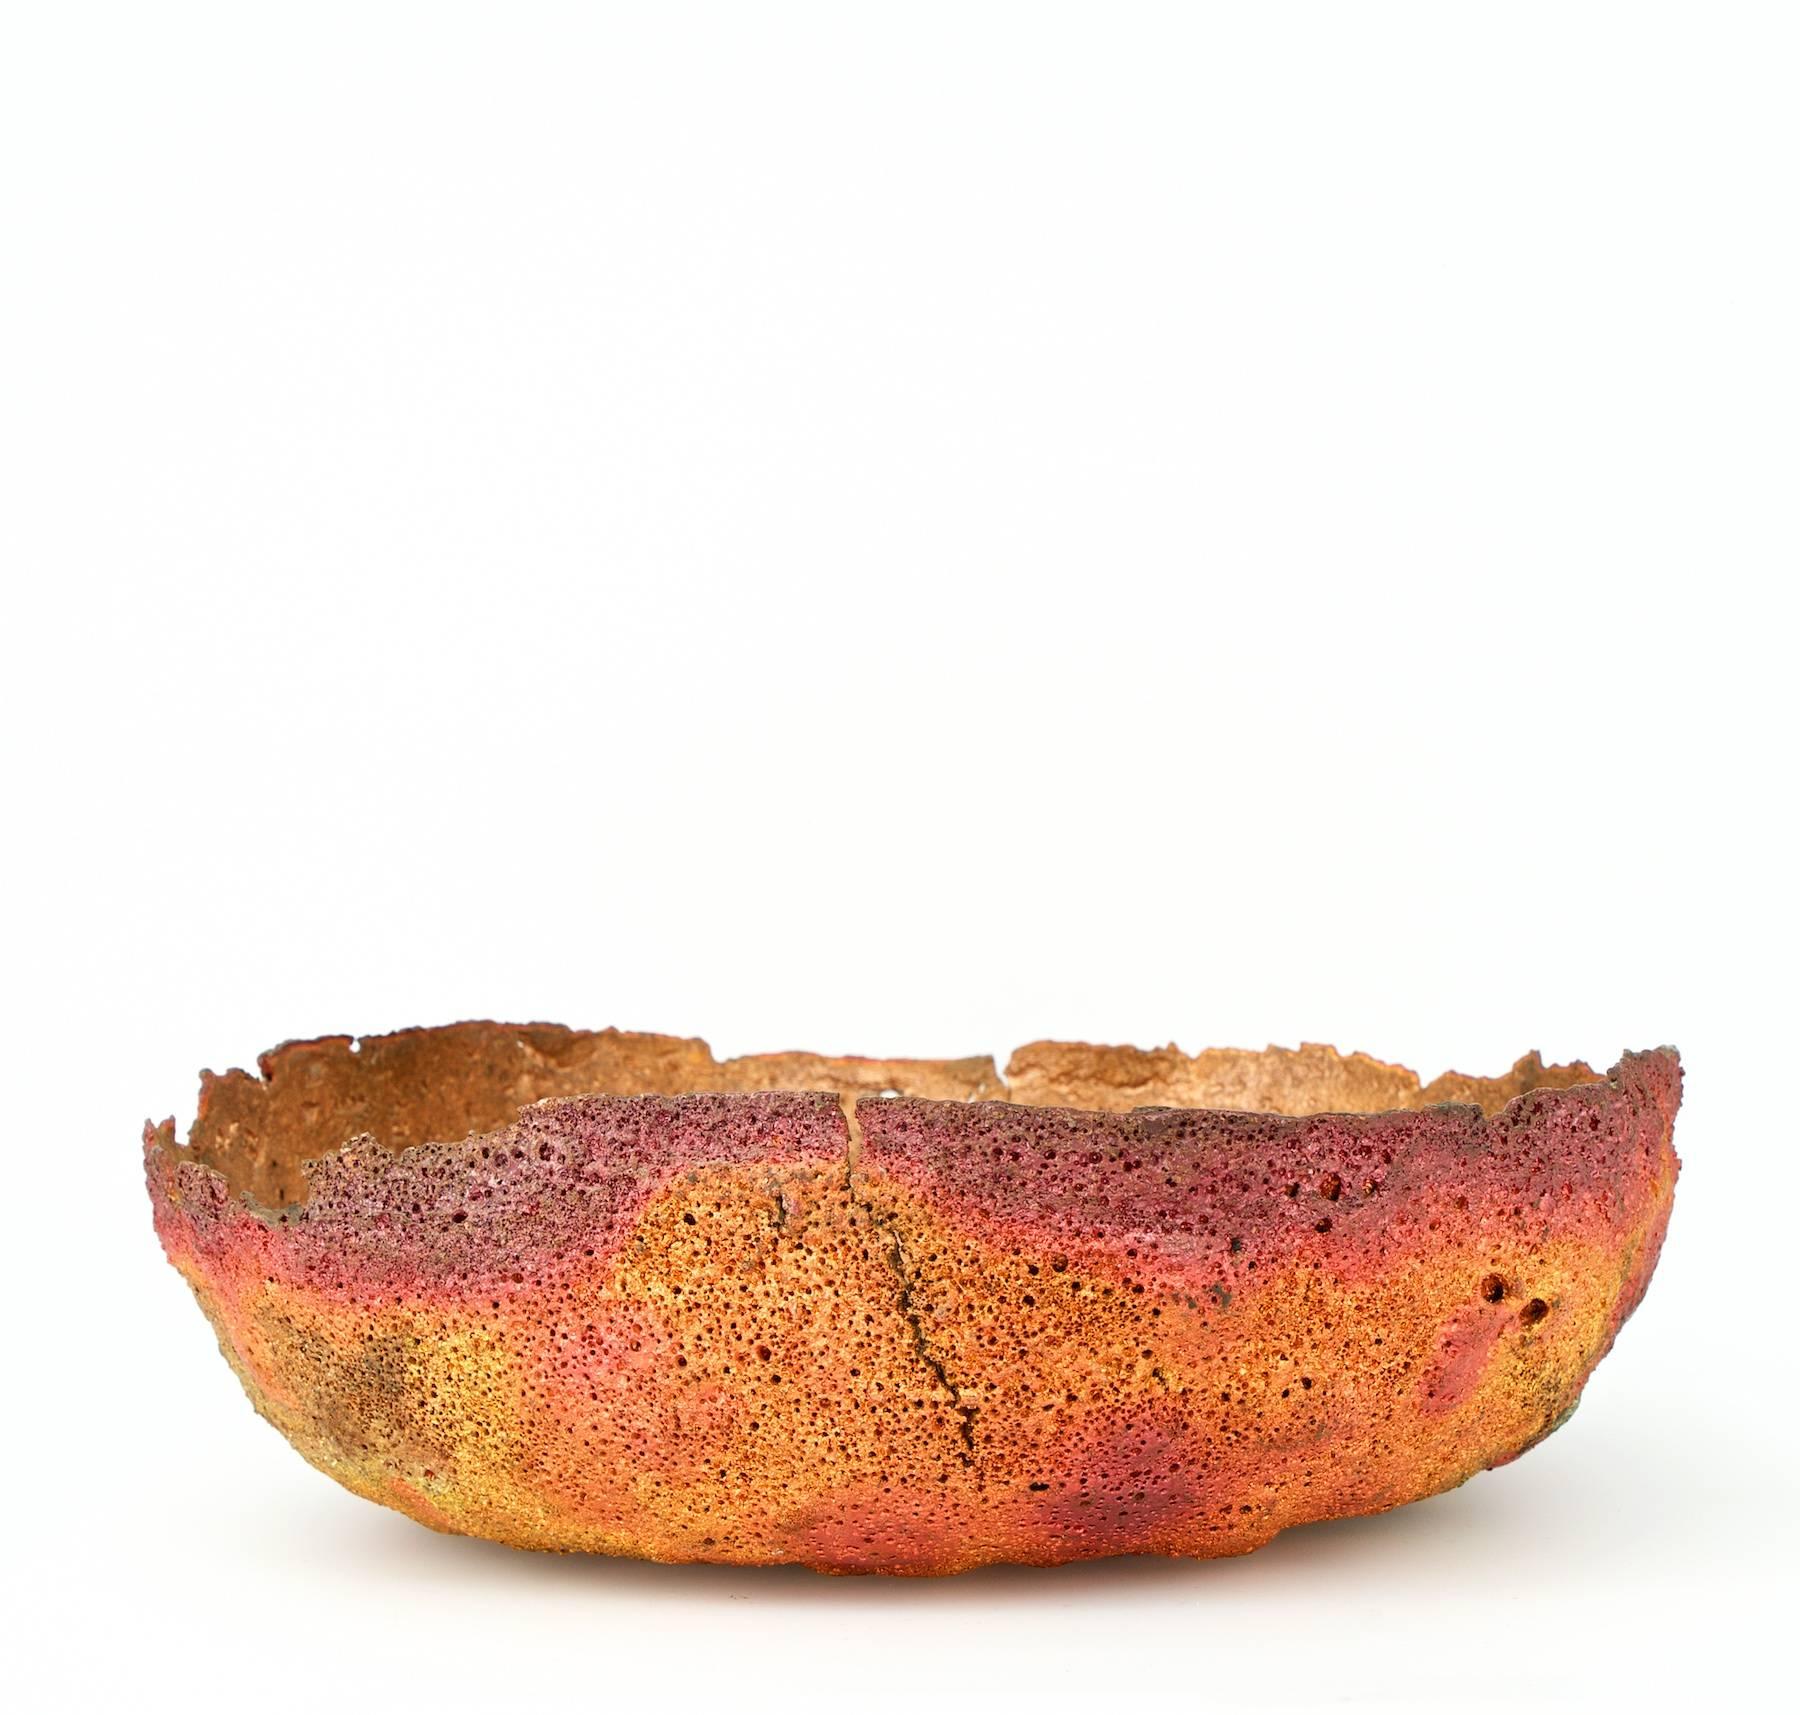 Mid-Century Modern Organic Mid-Century Brutalist Volcanic Textured Molten Formed Copper Metal Bowl For Sale